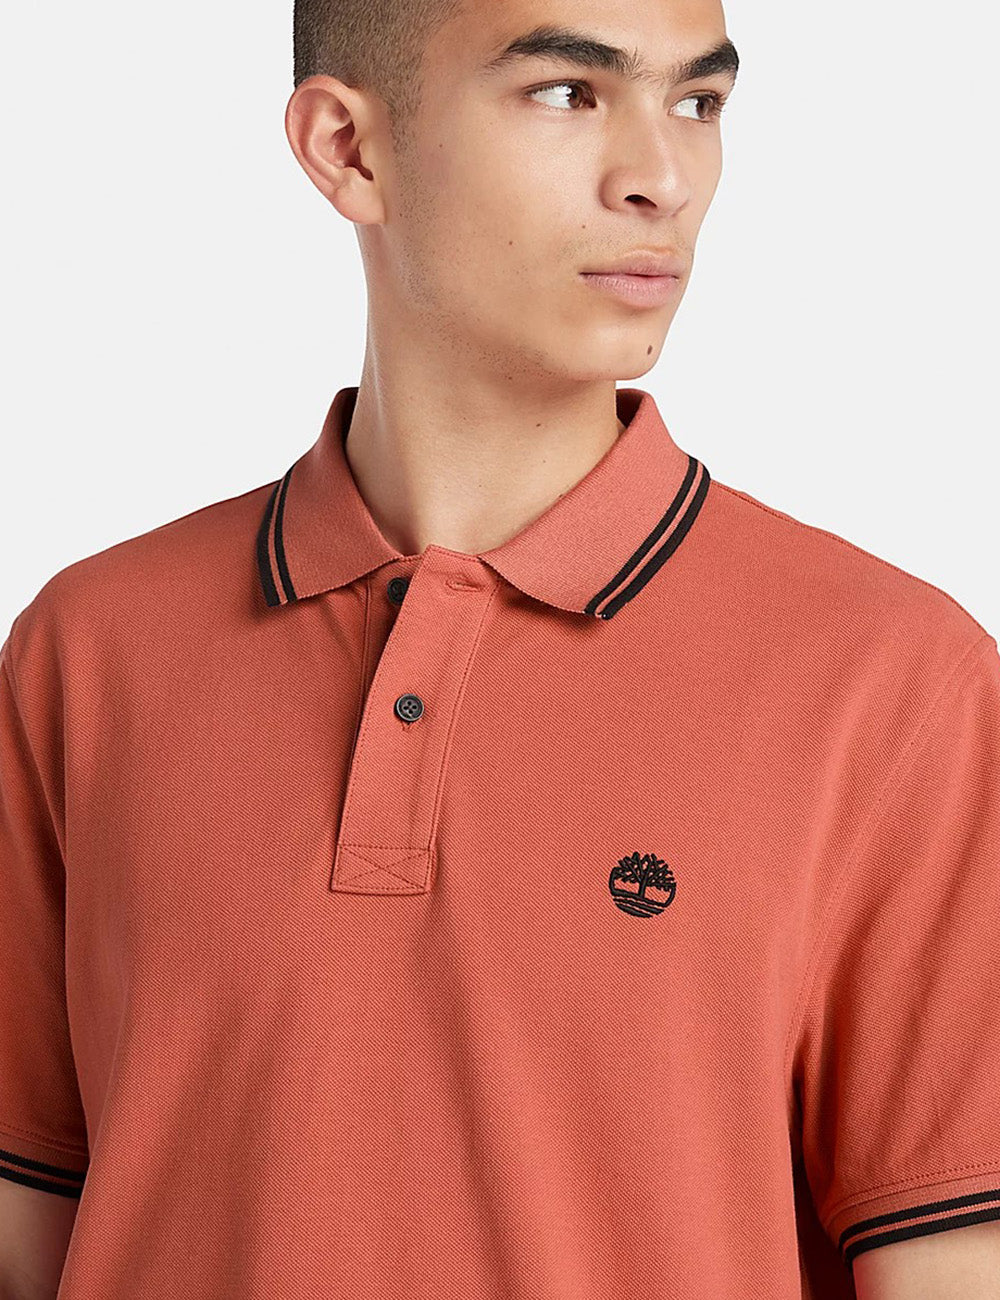 Timberland Millers River Tipped Polo Shirt - Burnt Sienna